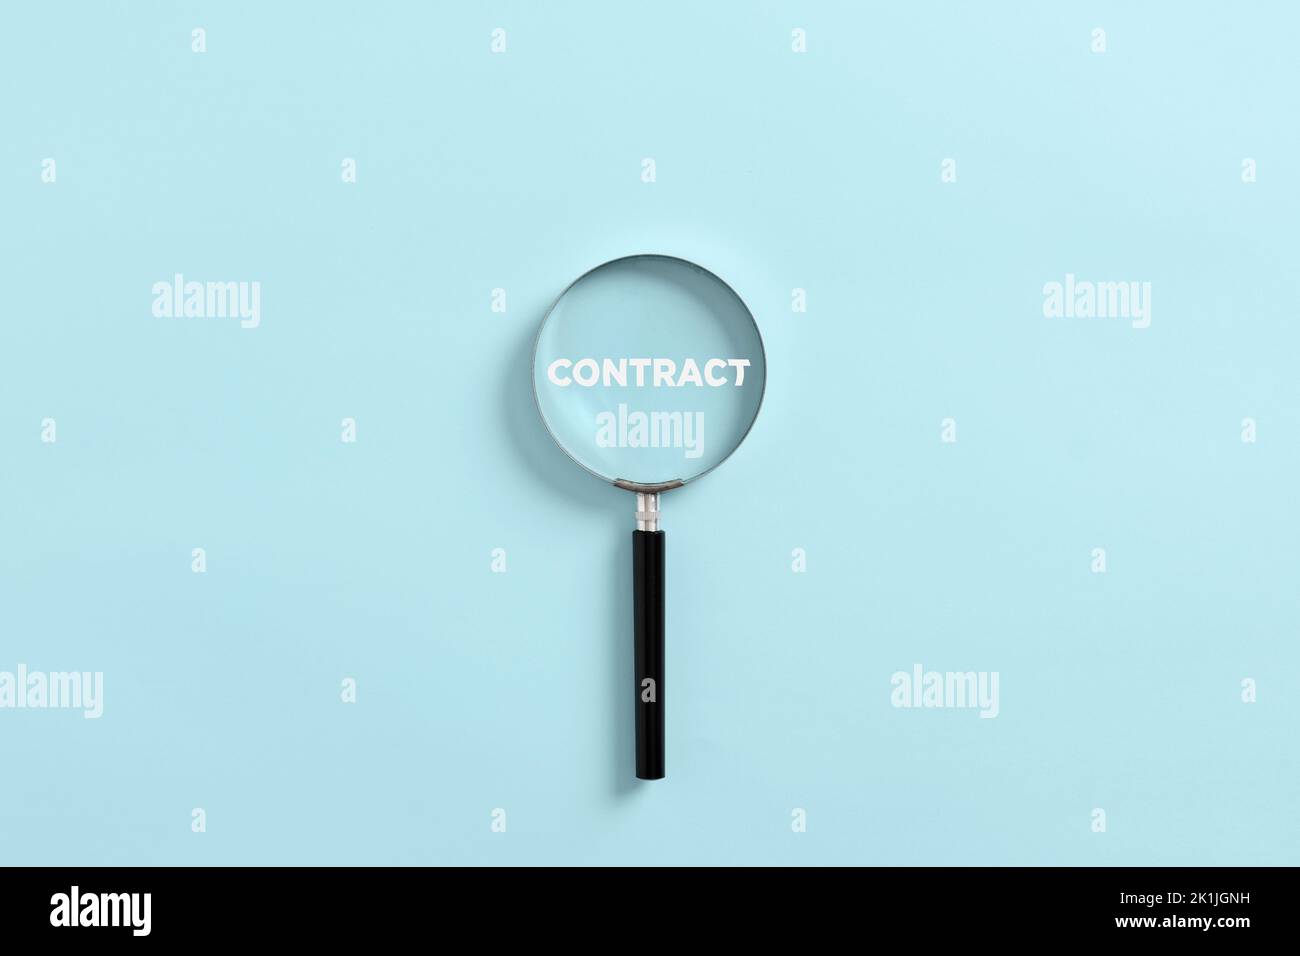 Magnifying glass magnifies the word contract. Analyzing or investigating the business contract concept. Stock Photo